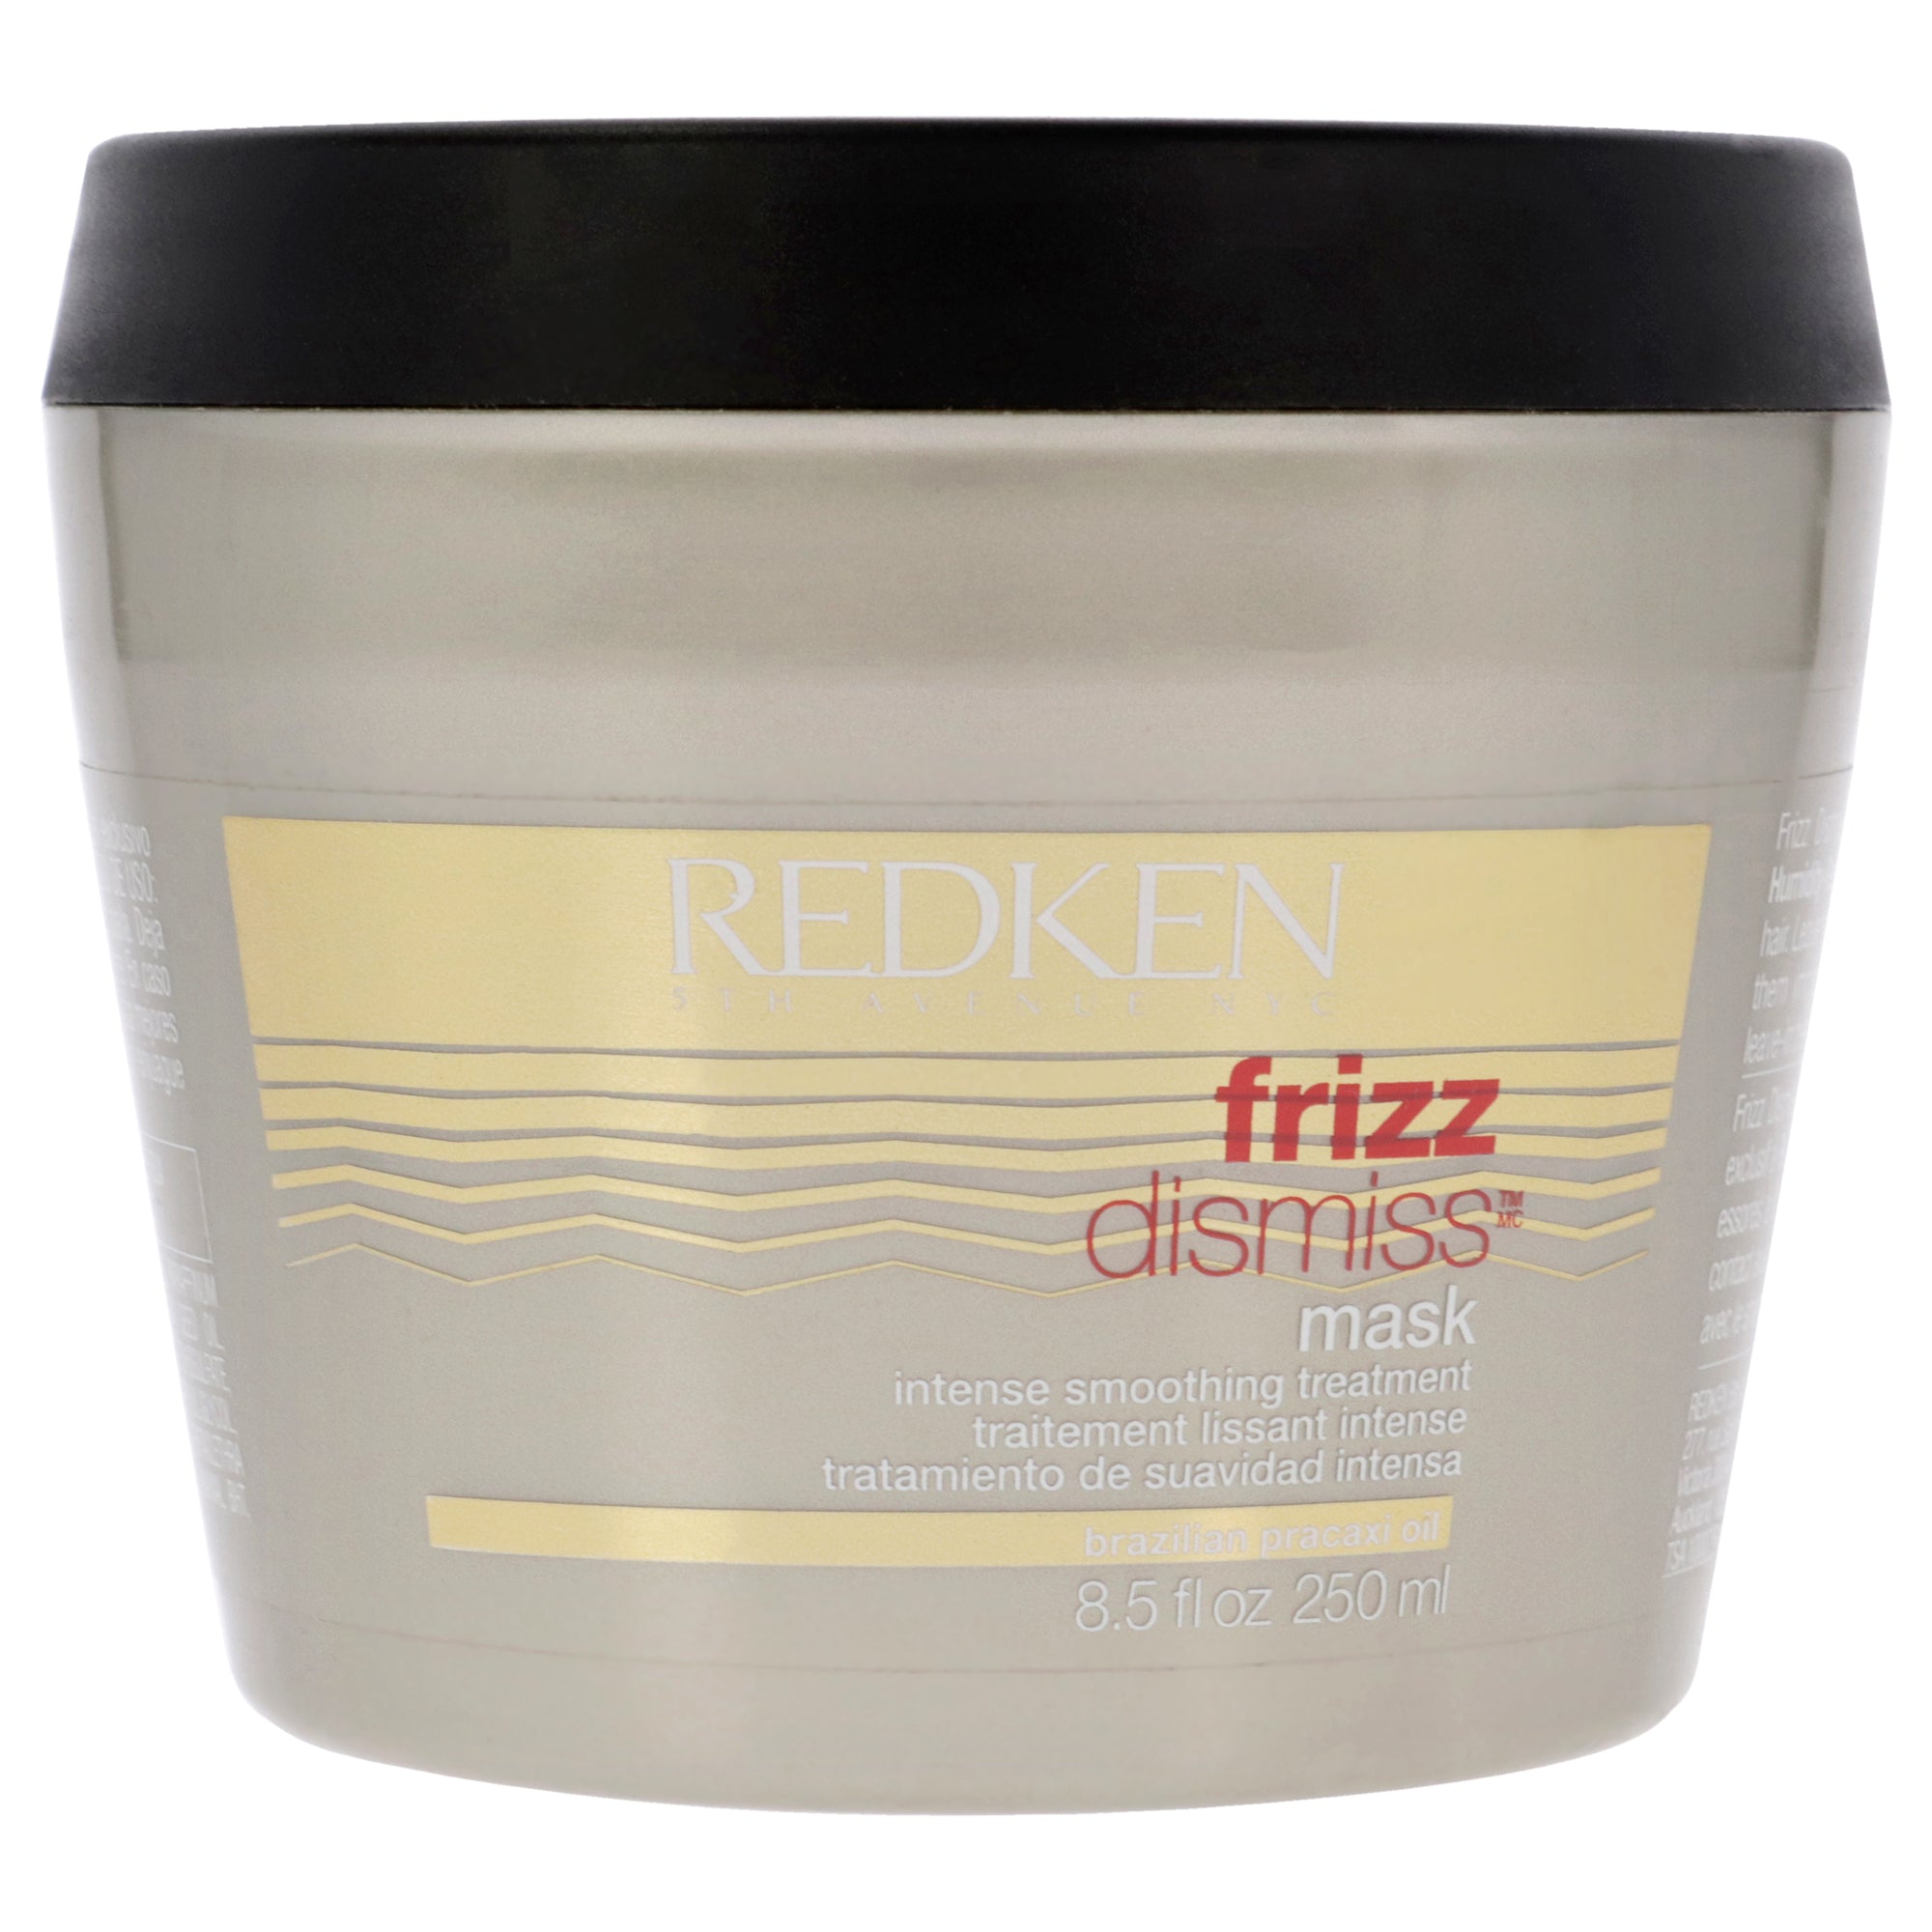 Frizz Dismiss Mask Intense Smoothing Treatment by Redken for Unisex 8.5 oz Mask